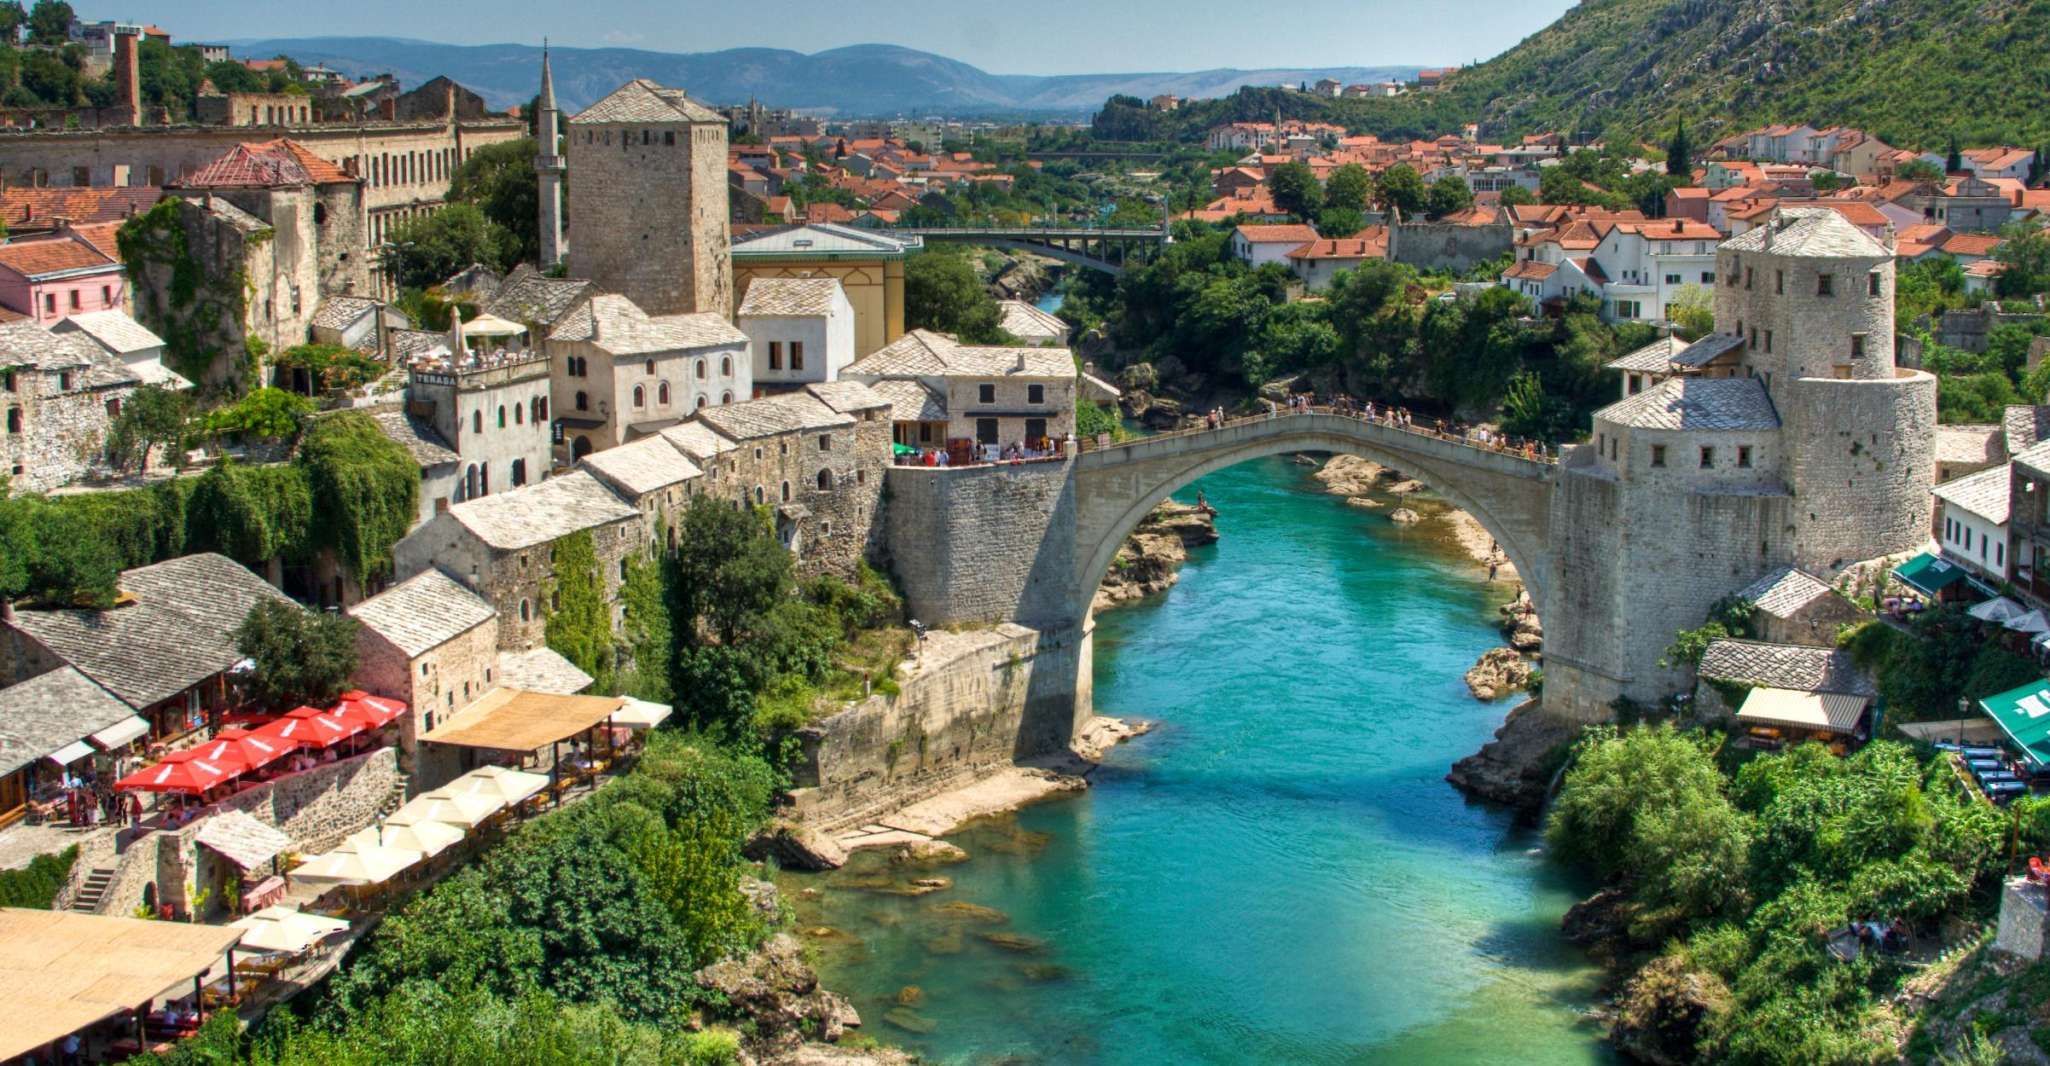 Mostar & Kravica Waterfall, Small Group Tour from Dubrovnik - Housity